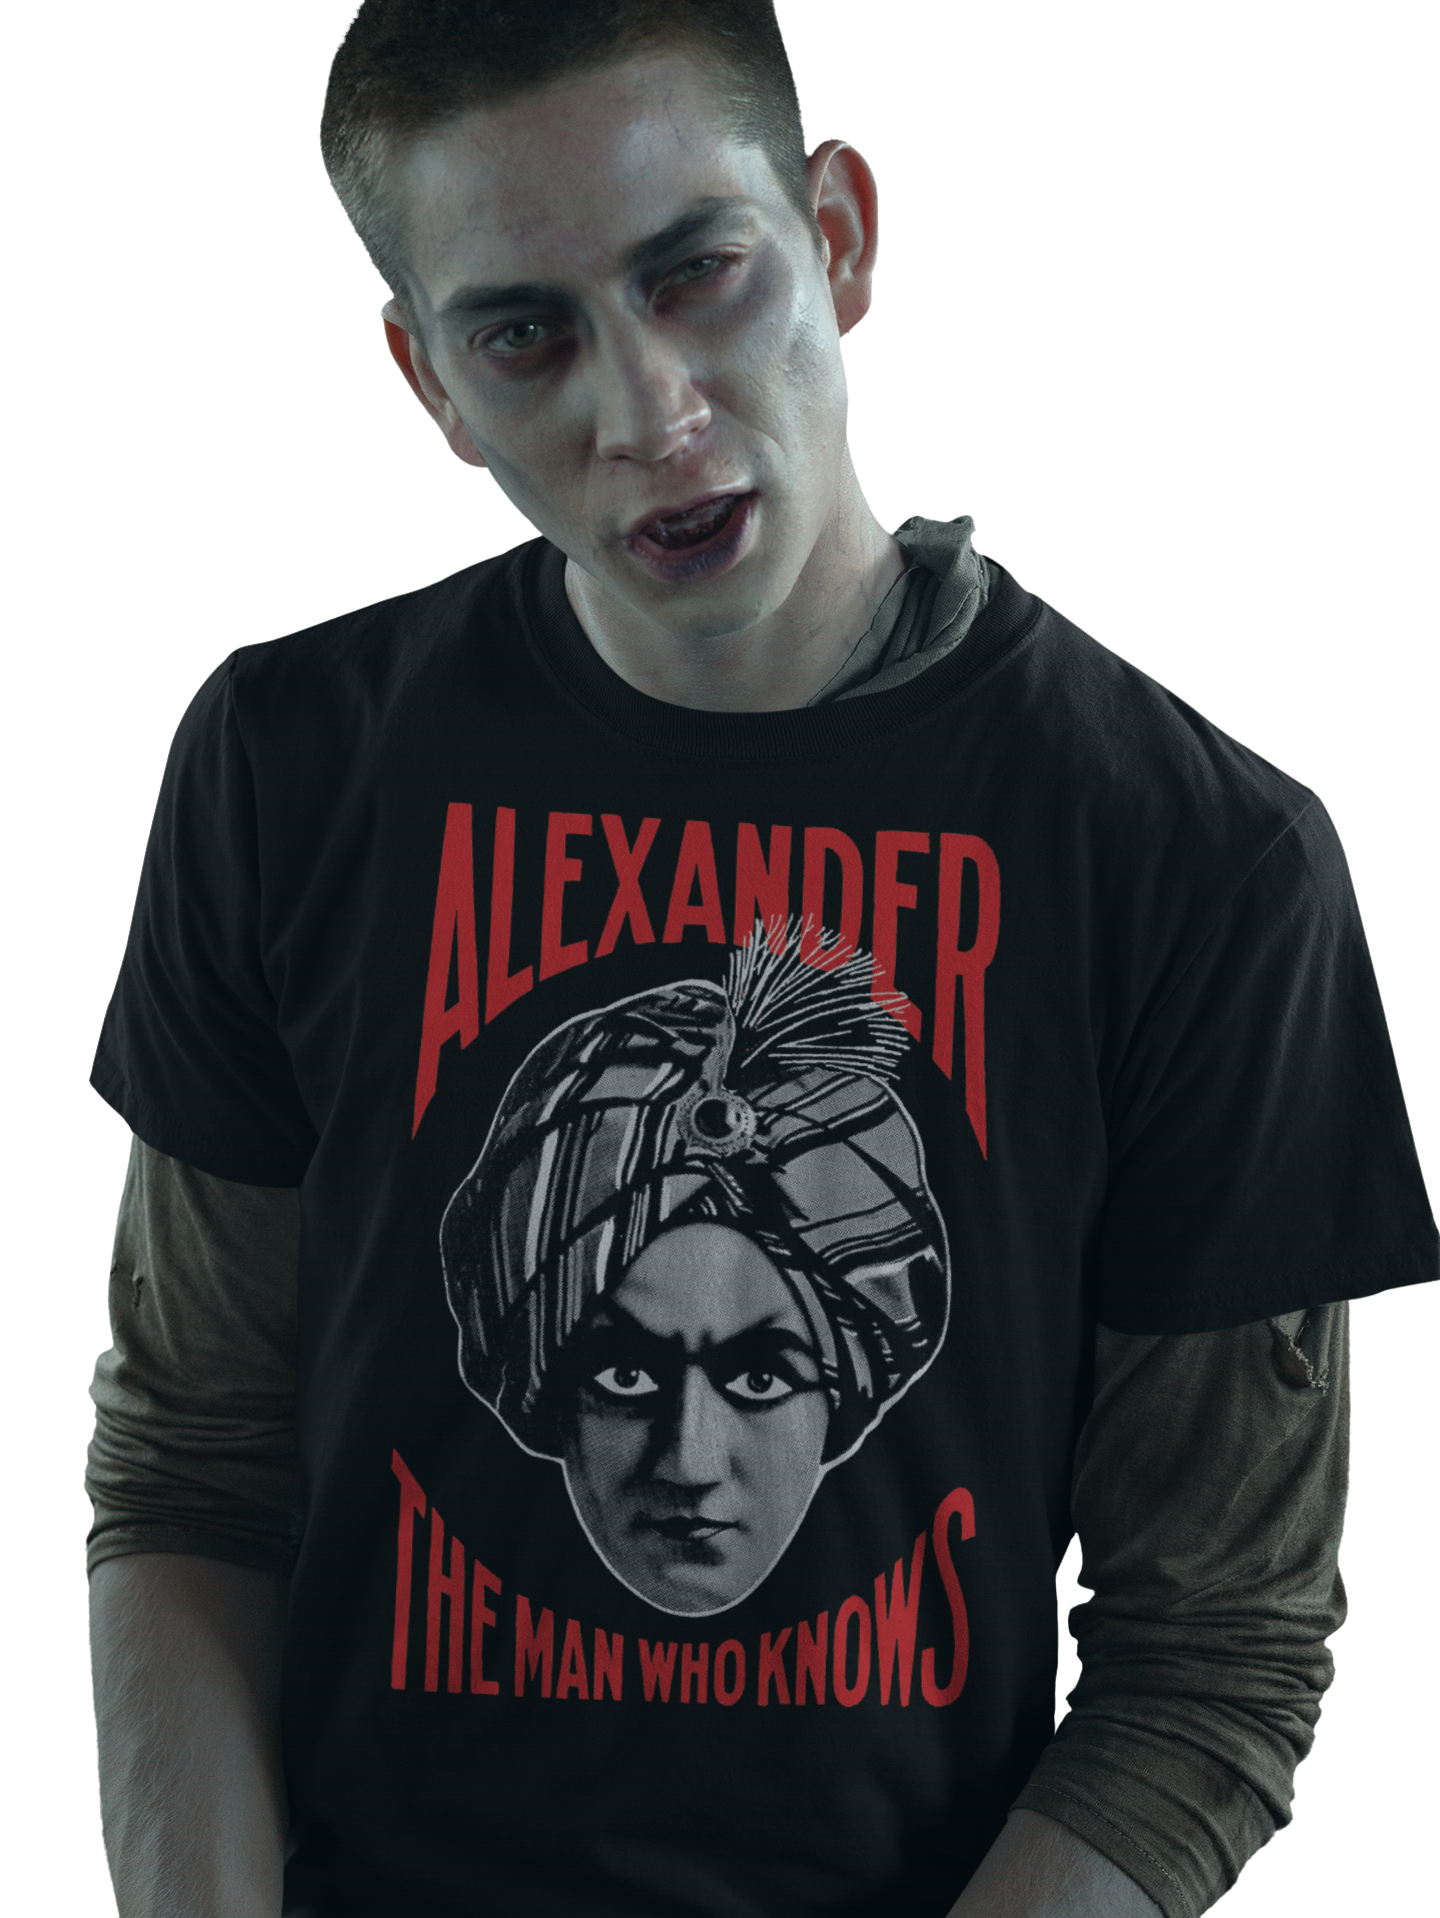 ATOM AGE: "ALEXANDER - THE MAN WHO KNOWS" T-SHIRT